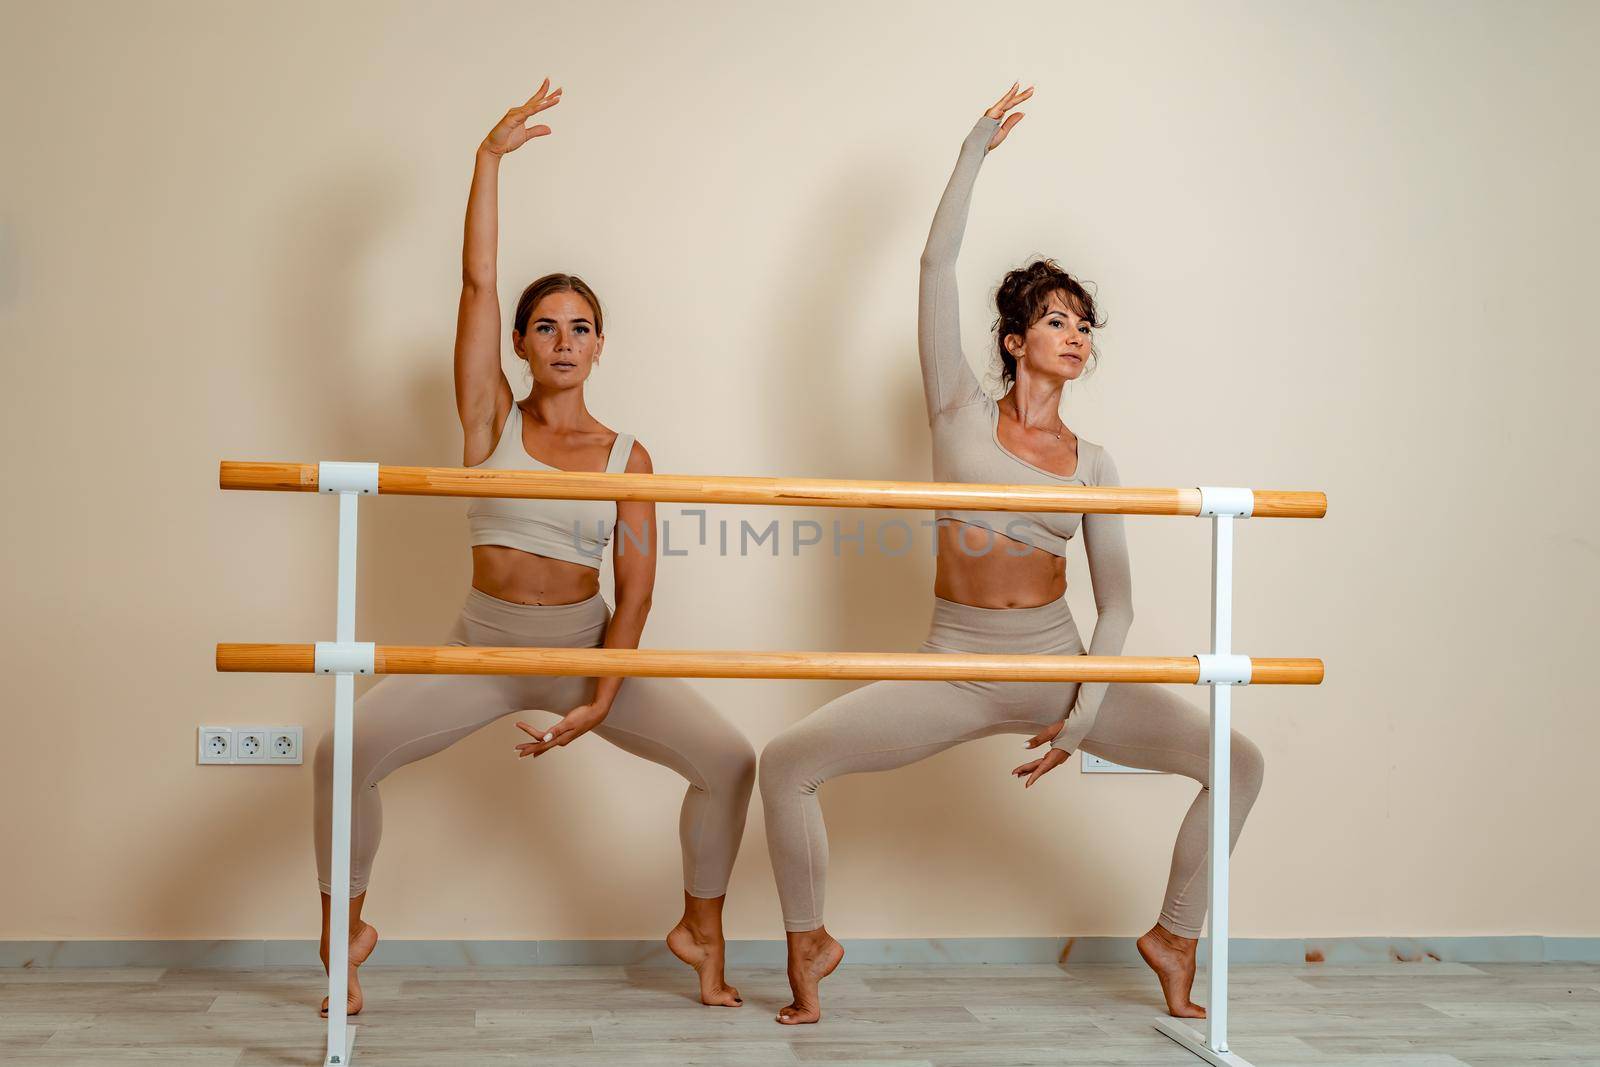 Near the barre, in the choreographic hall, two women in a beige top and leggings are engaged